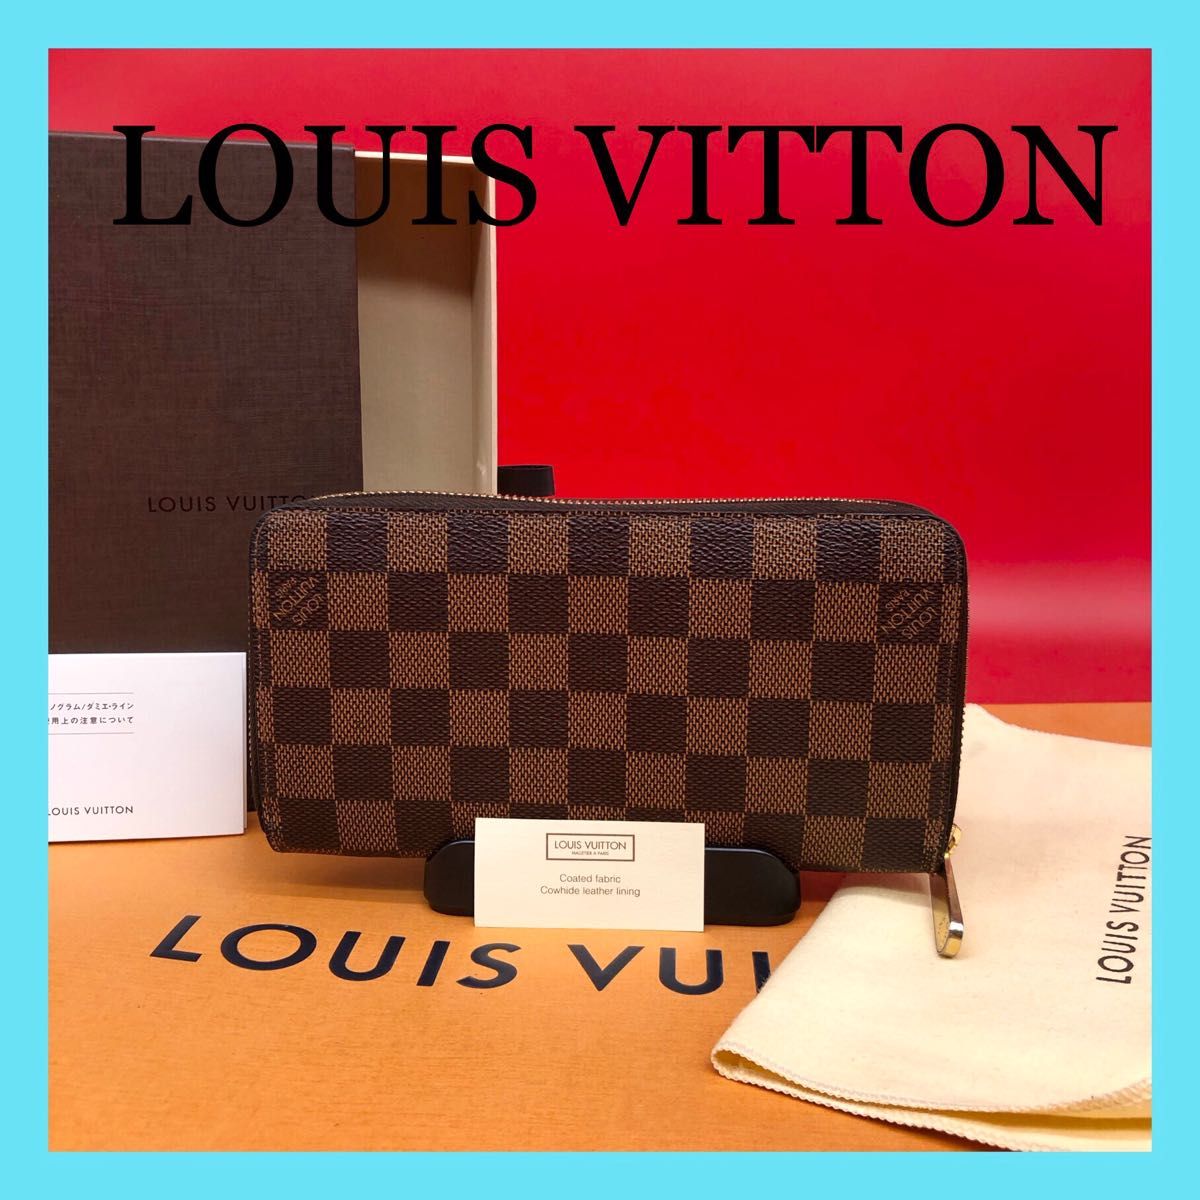 LOUIS VUITTON ルイ ヴィトン ダミエグラフィット ジッピー 